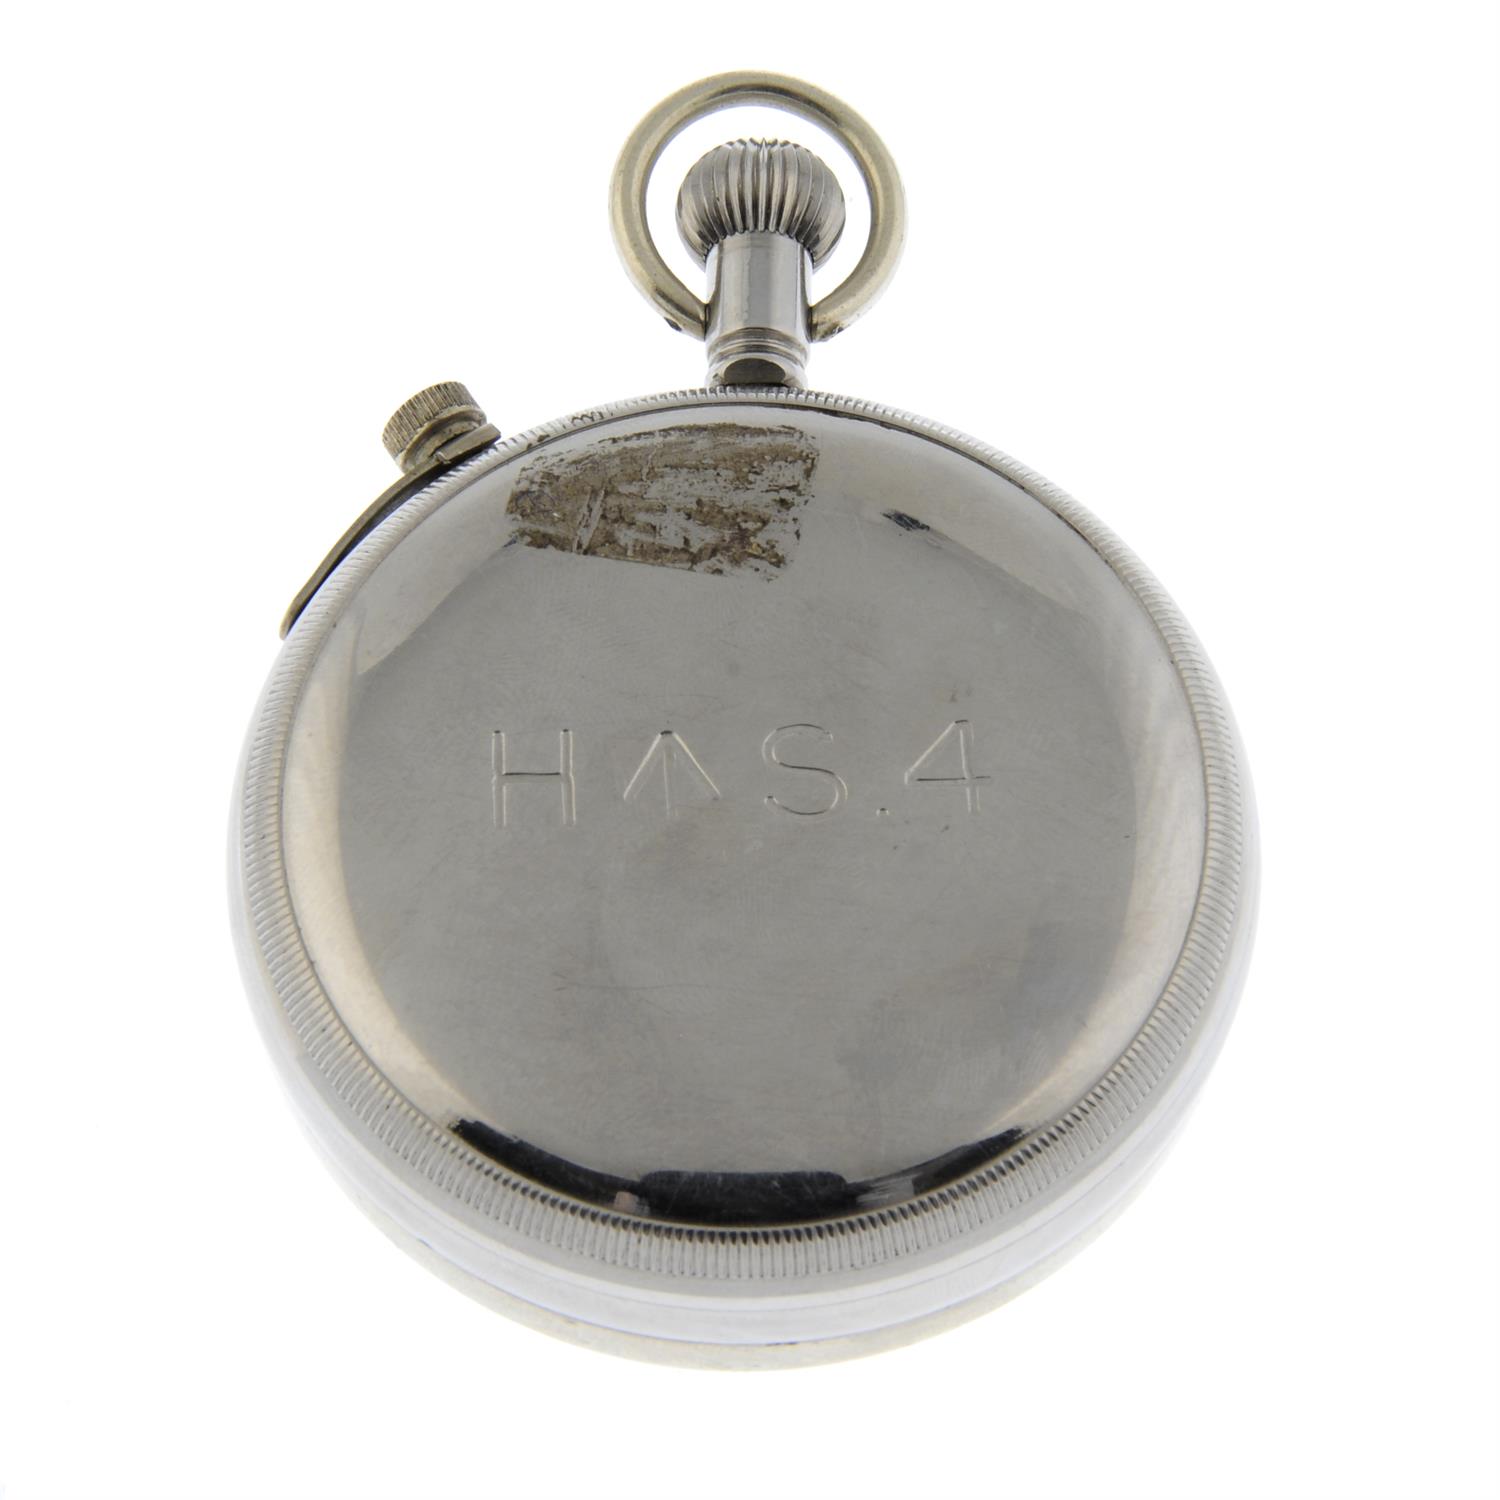 H. GOLAY - a stainless steel military issue navigation timer, 62mm. - Image 2 of 3